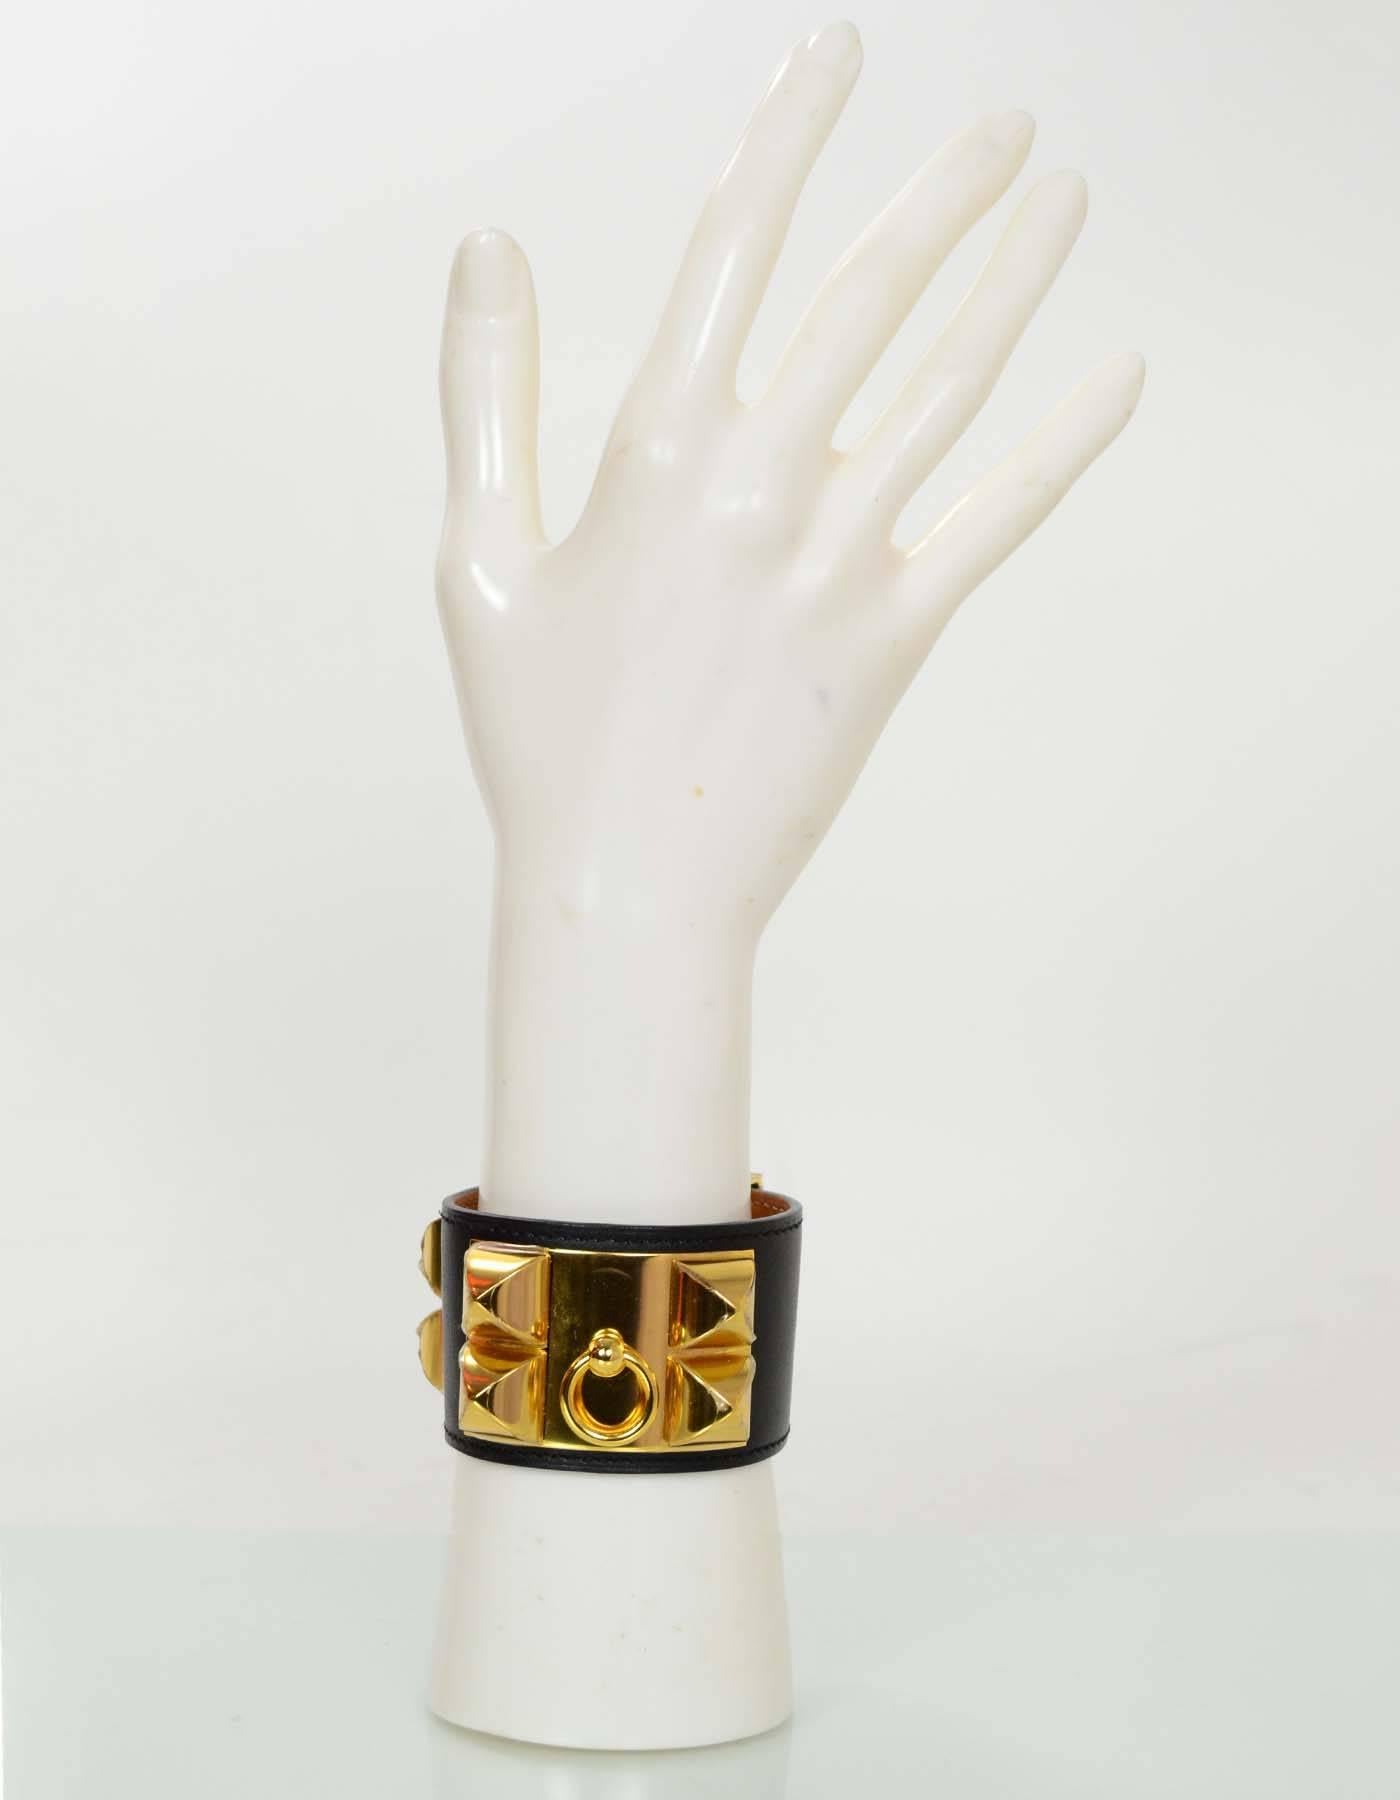 Hermes Black & Gold Collier de Chien CDC Cuff Bracelet sz S

Made In: France
Year of Production: 2013
Color: Black
Hardware: Goldtone
Materials: Leather and metal
Closure: Stud and notch closure
Stamp: Q stamp in square
Overall Condition: